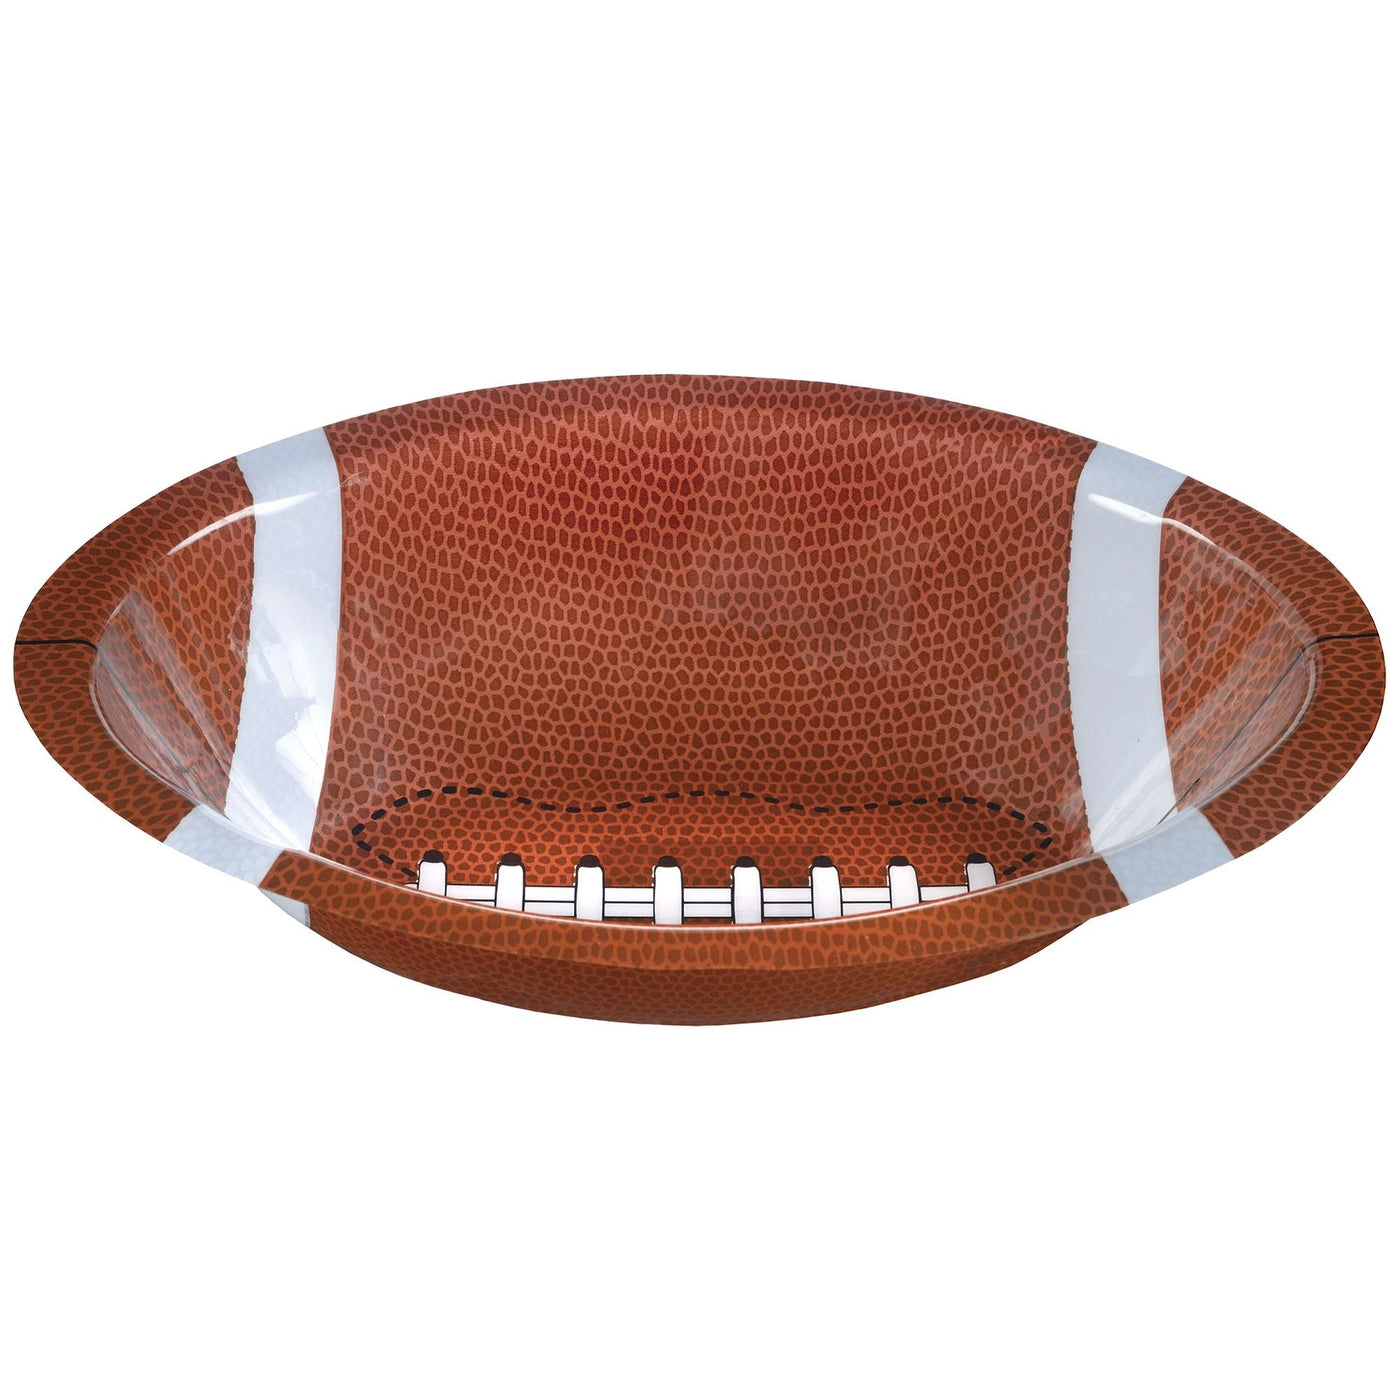 Large Plastic Fooball Bowl/Tray 14.25" - JJ's Party House - Custom Frosted Cups and Napkins